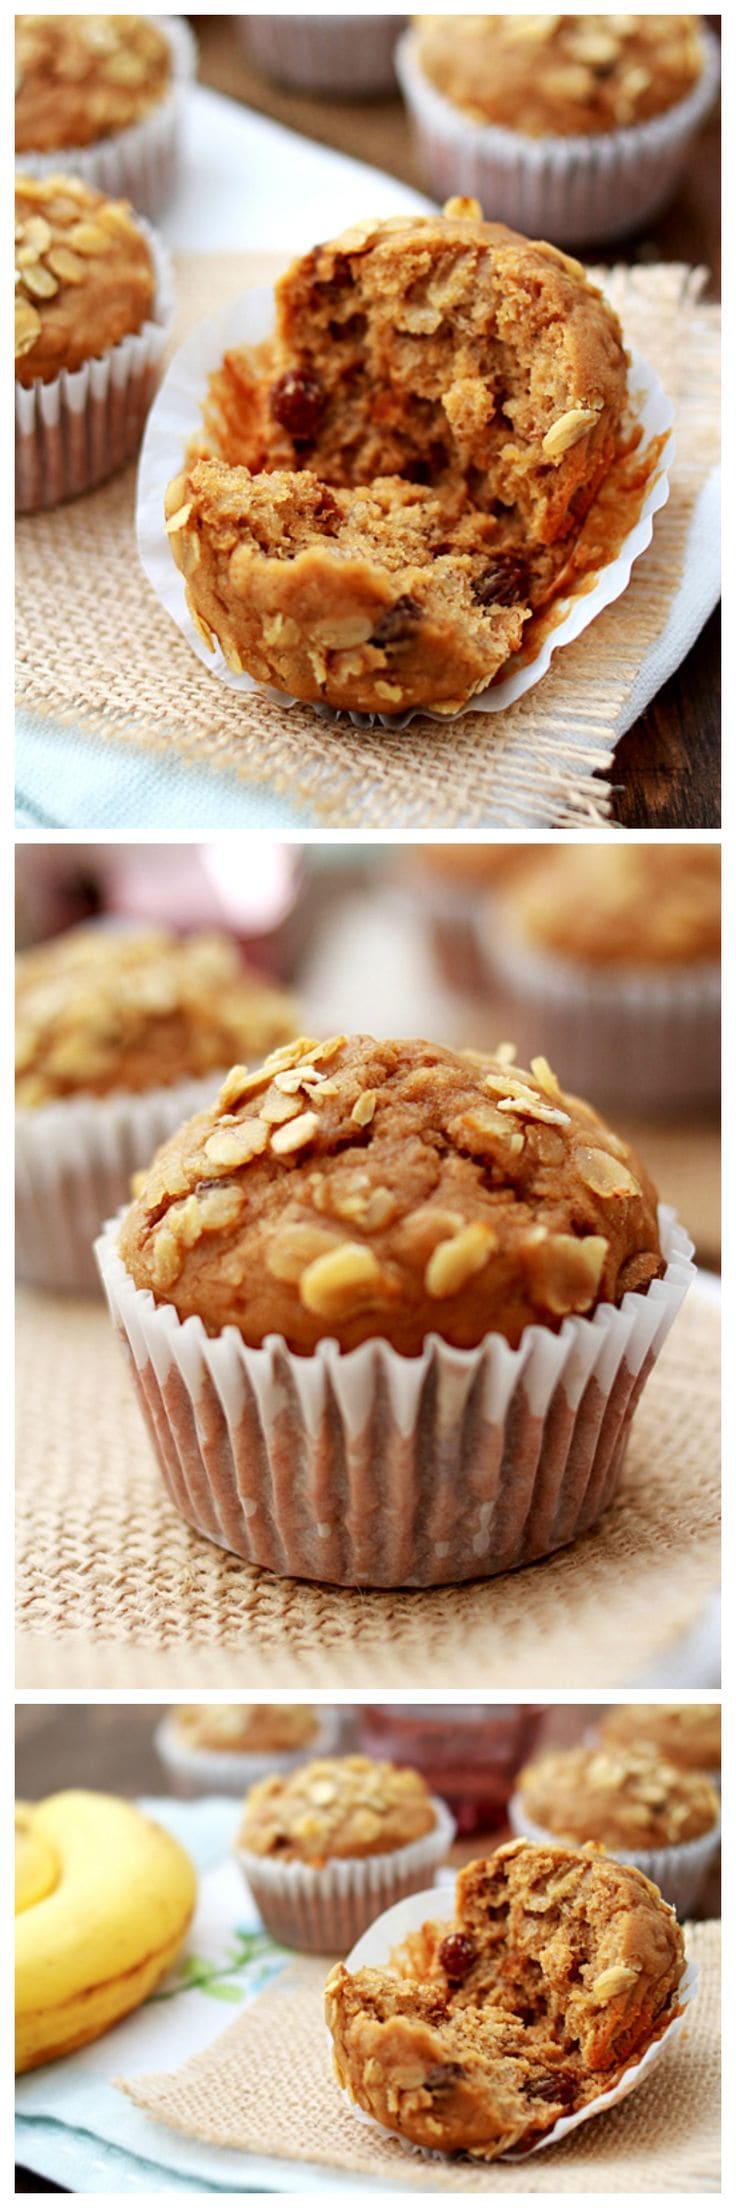 Banana Oatmeal Raisin Muffins. Healthy, light, and wholesome breakfast muffins. It packs all the nutrients you need for the day | rasamalaysia.com